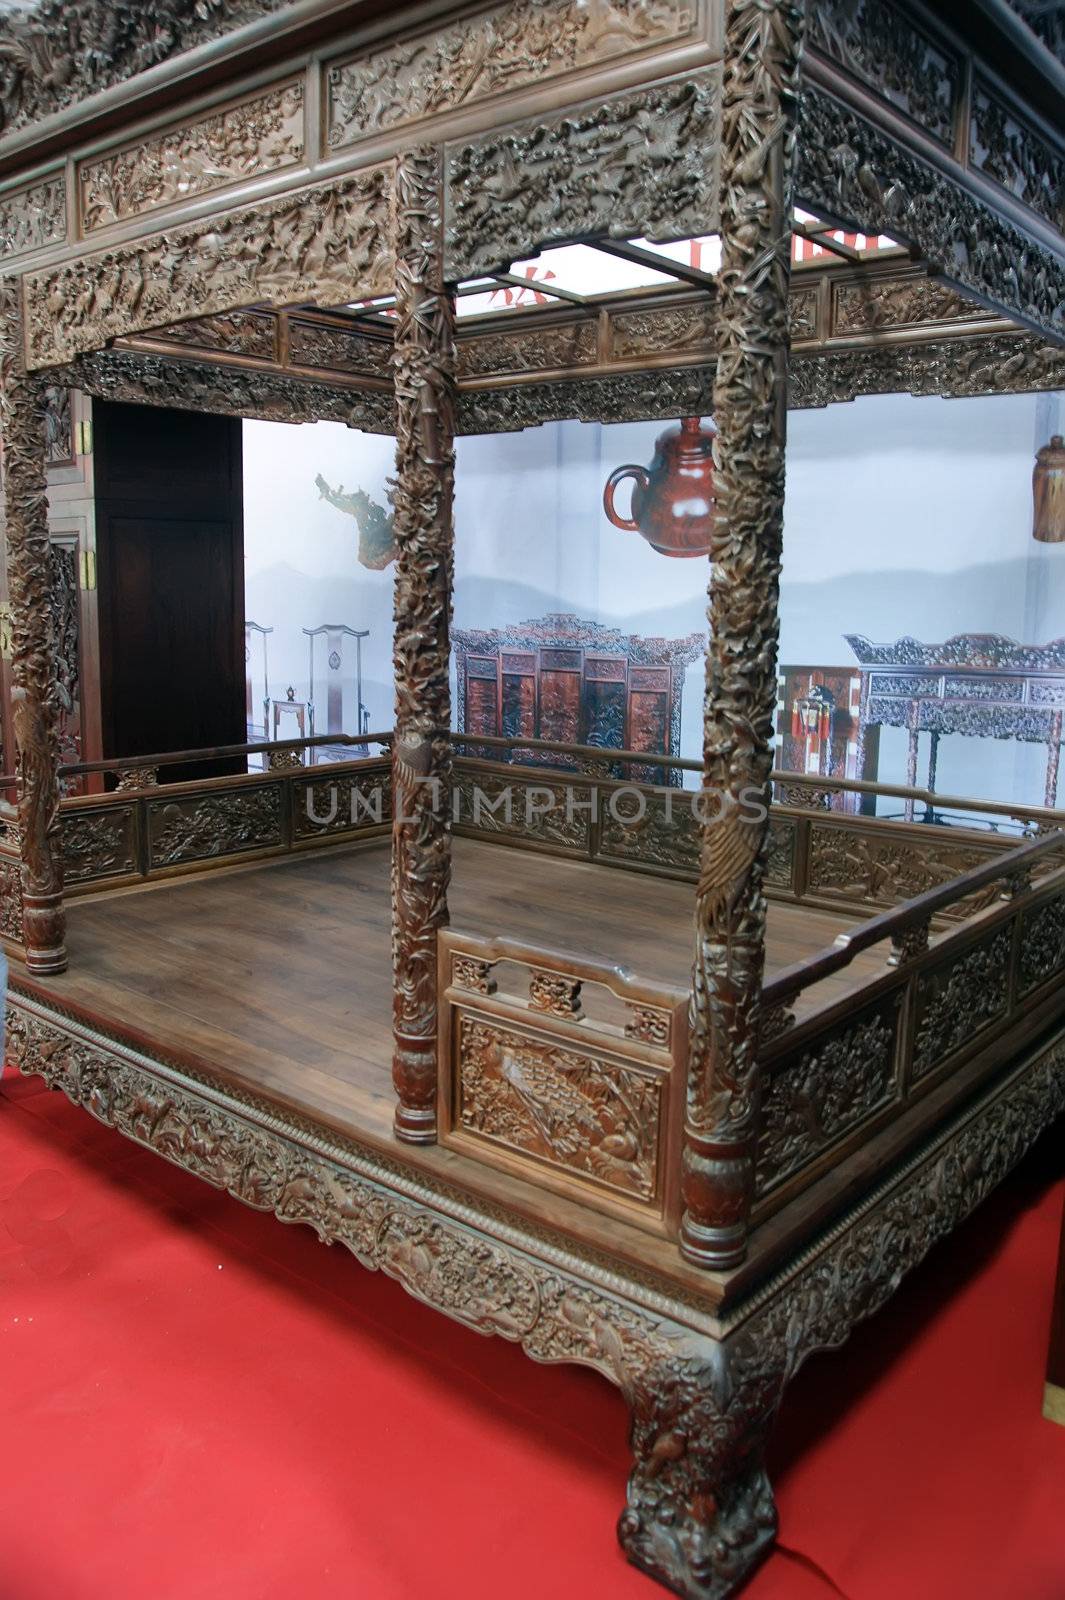 The entire bed from top to bottom inside and out covered with carved patterns